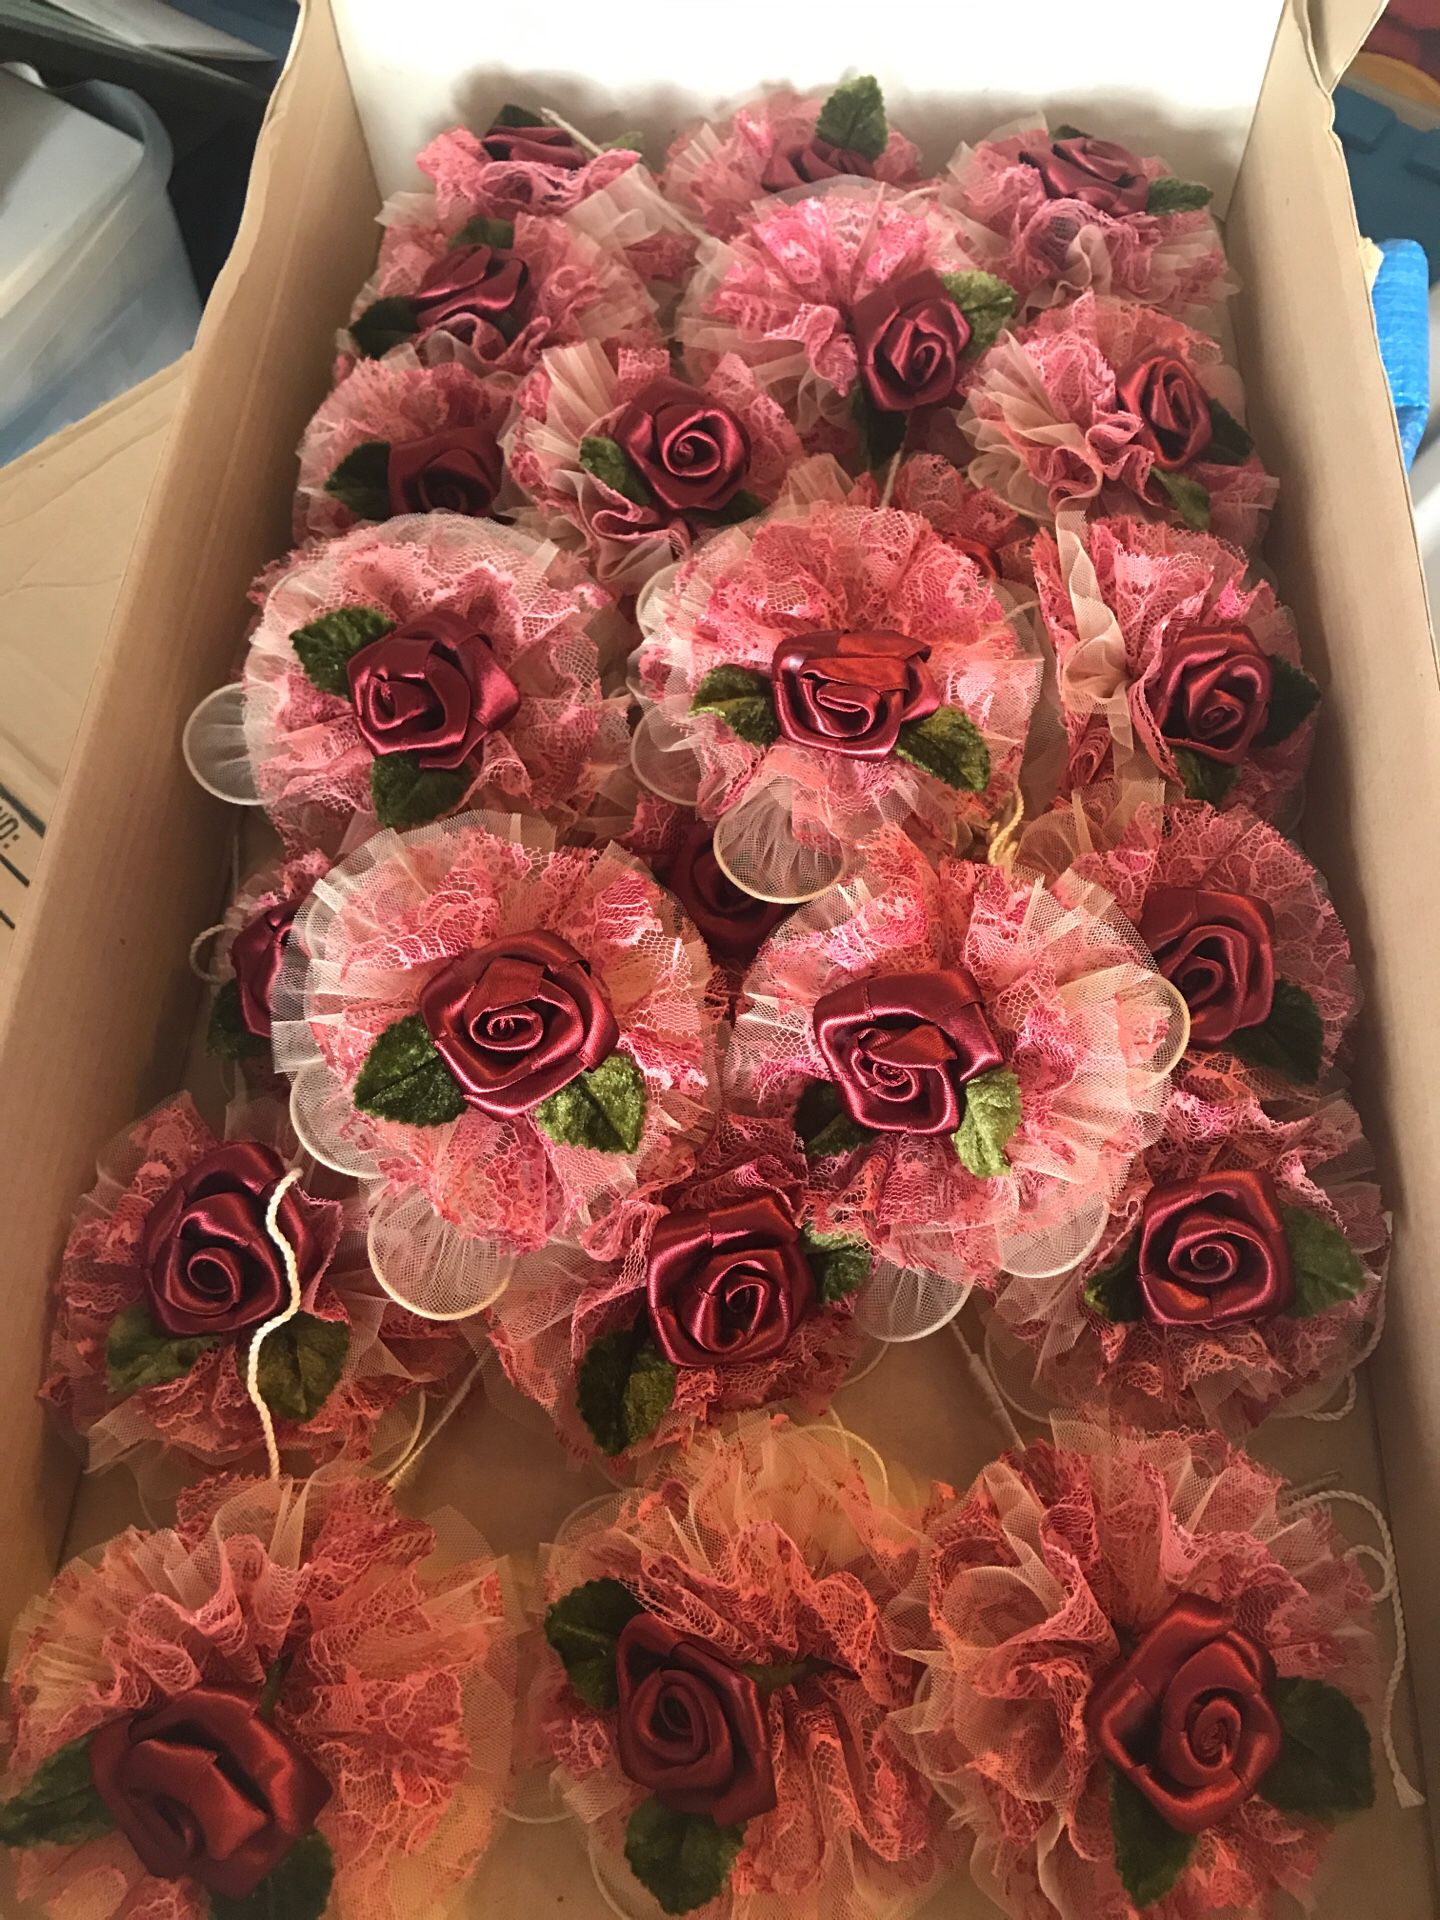 Ribbon-rose Wedding favors from Italy